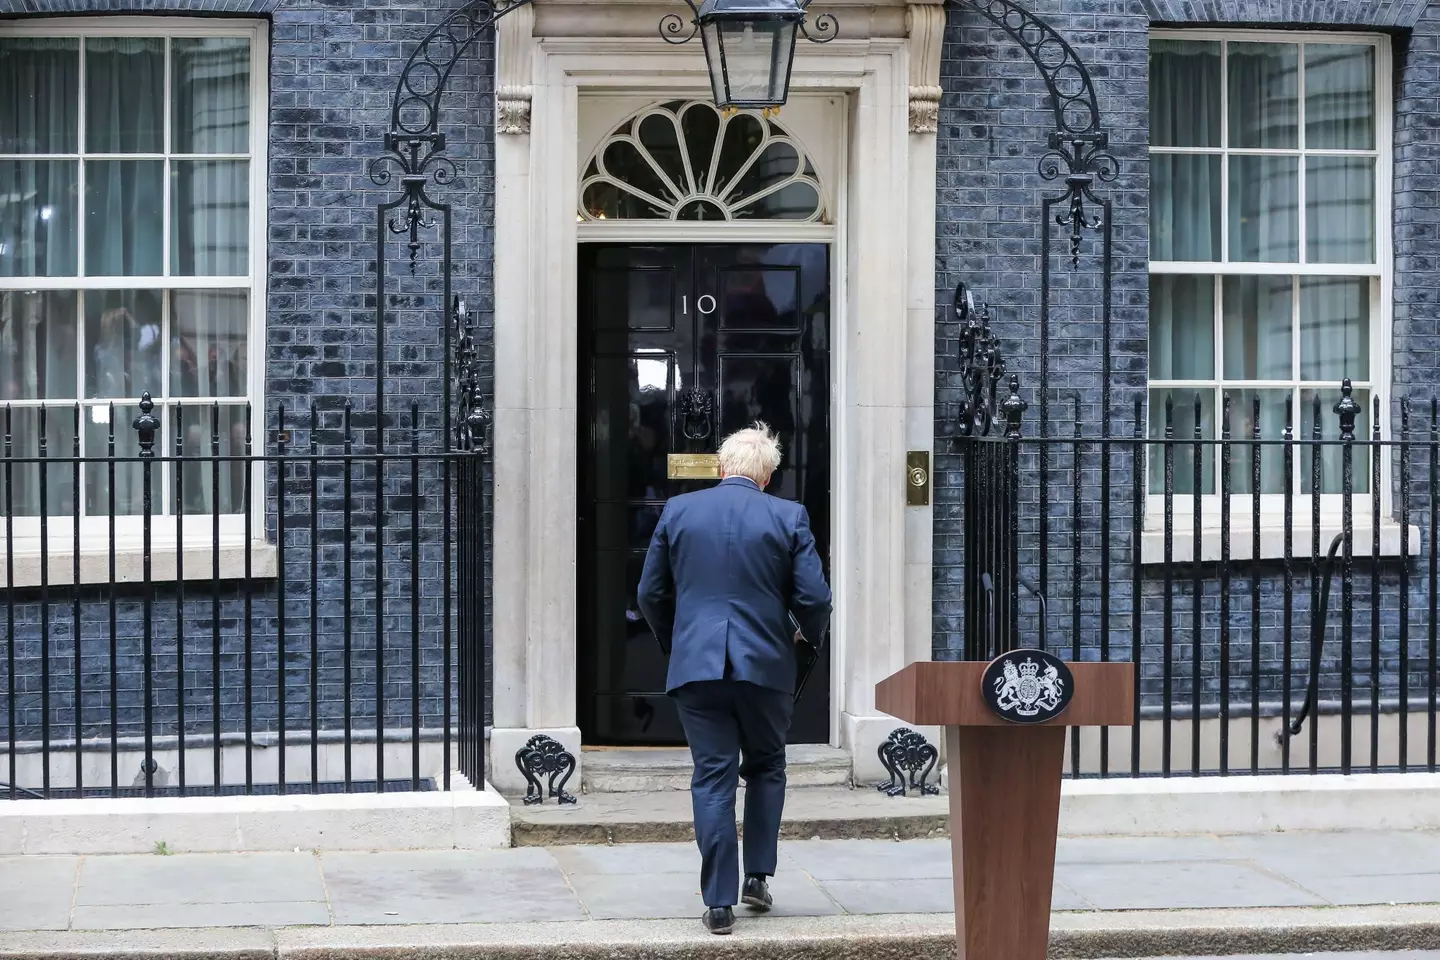 A date has been set for when Britain will have a new Prime Minister.